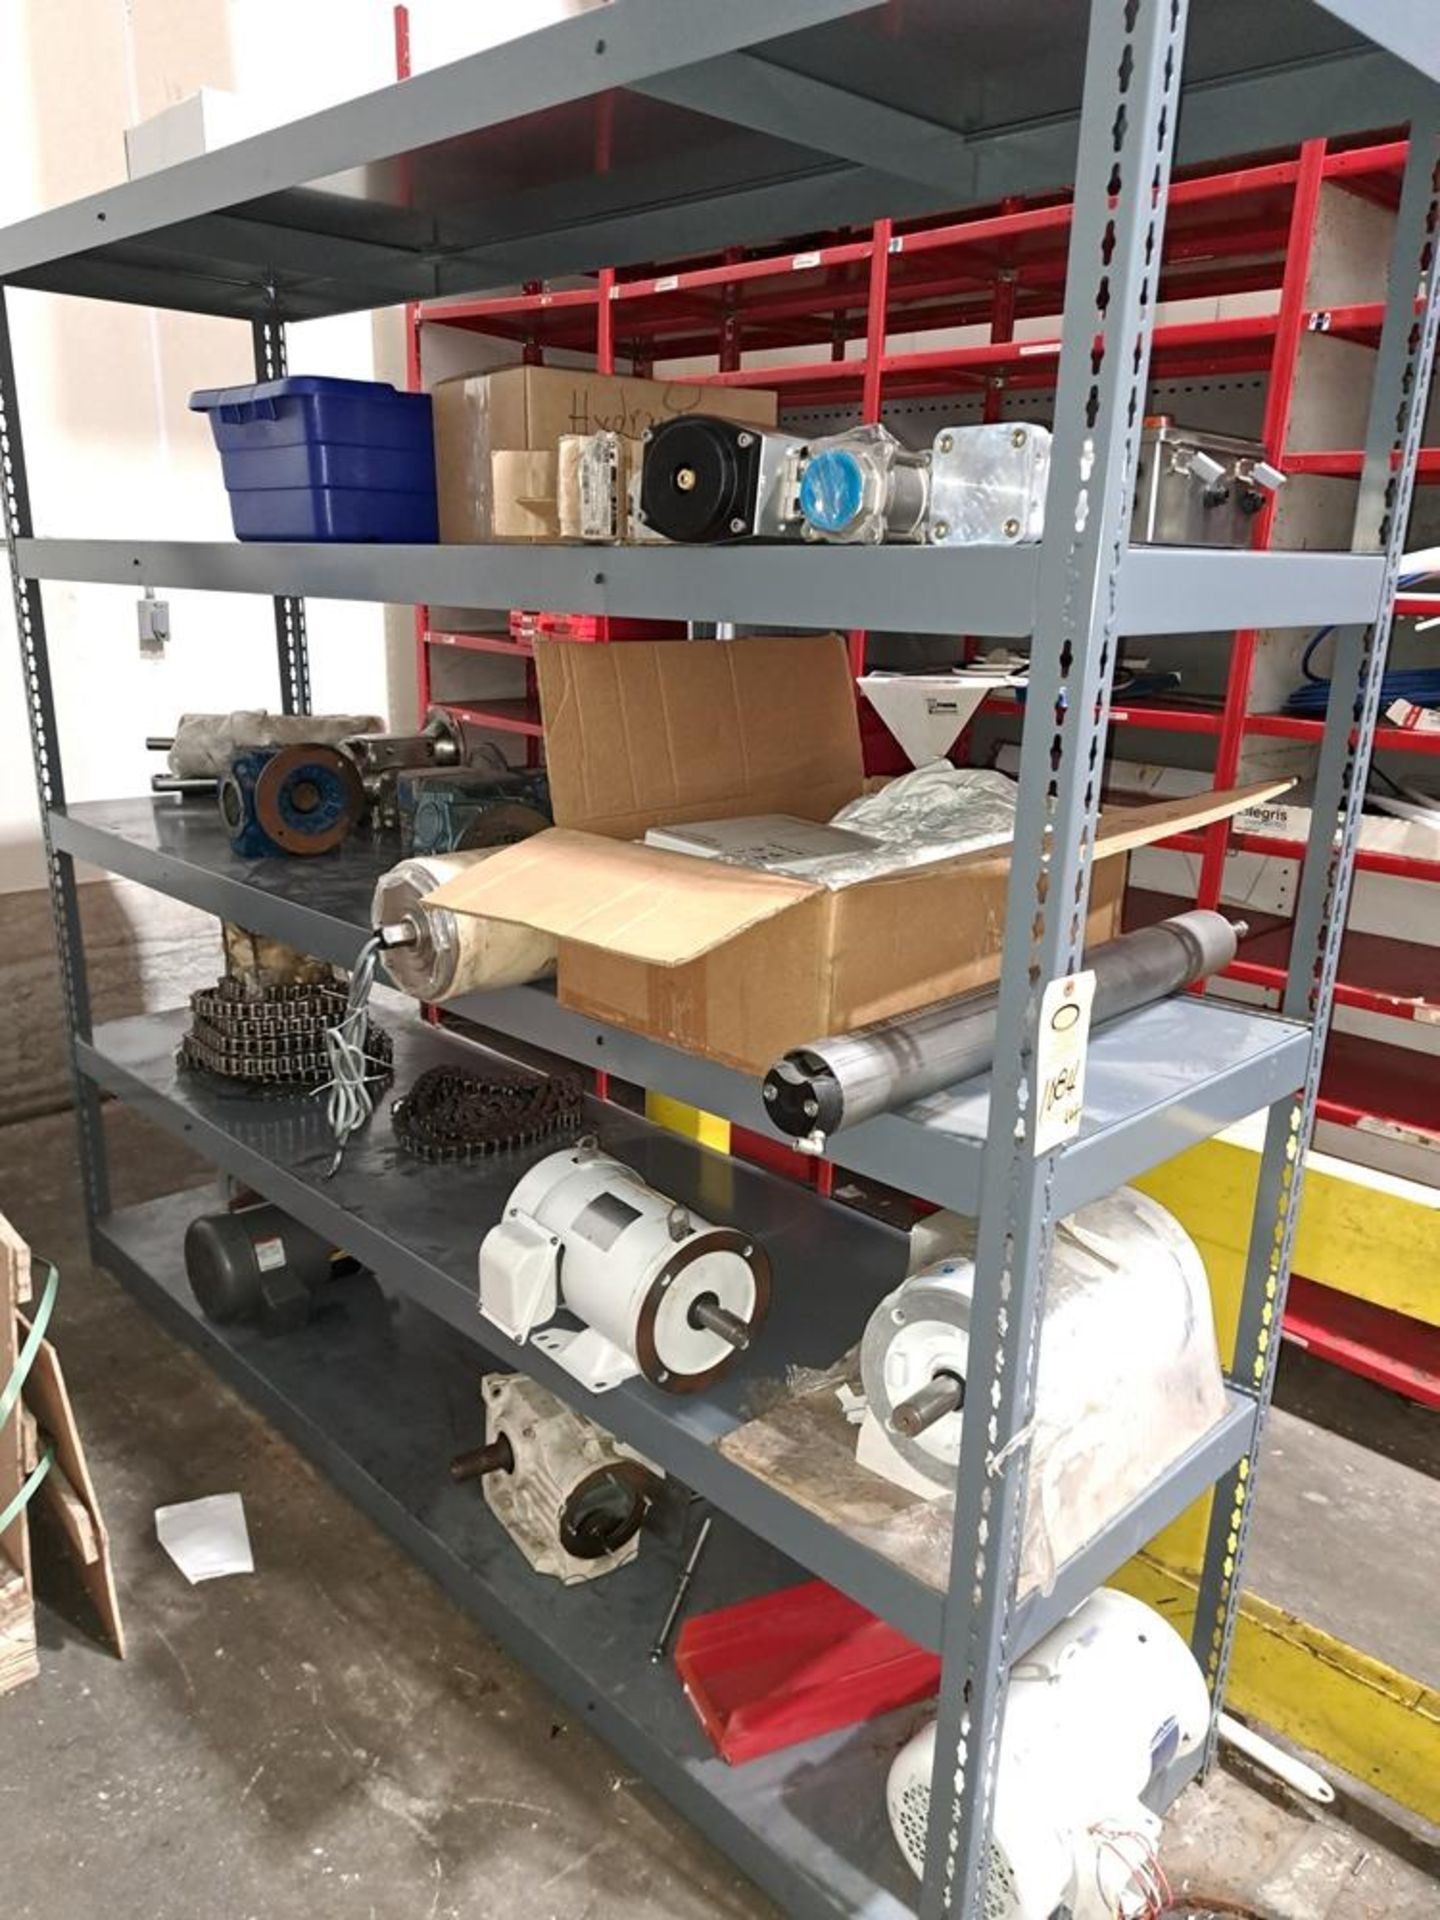 Lot Motors on shelving units, (Shelving not included), (6) Motors, (4) Gearboxes, Pneumatic